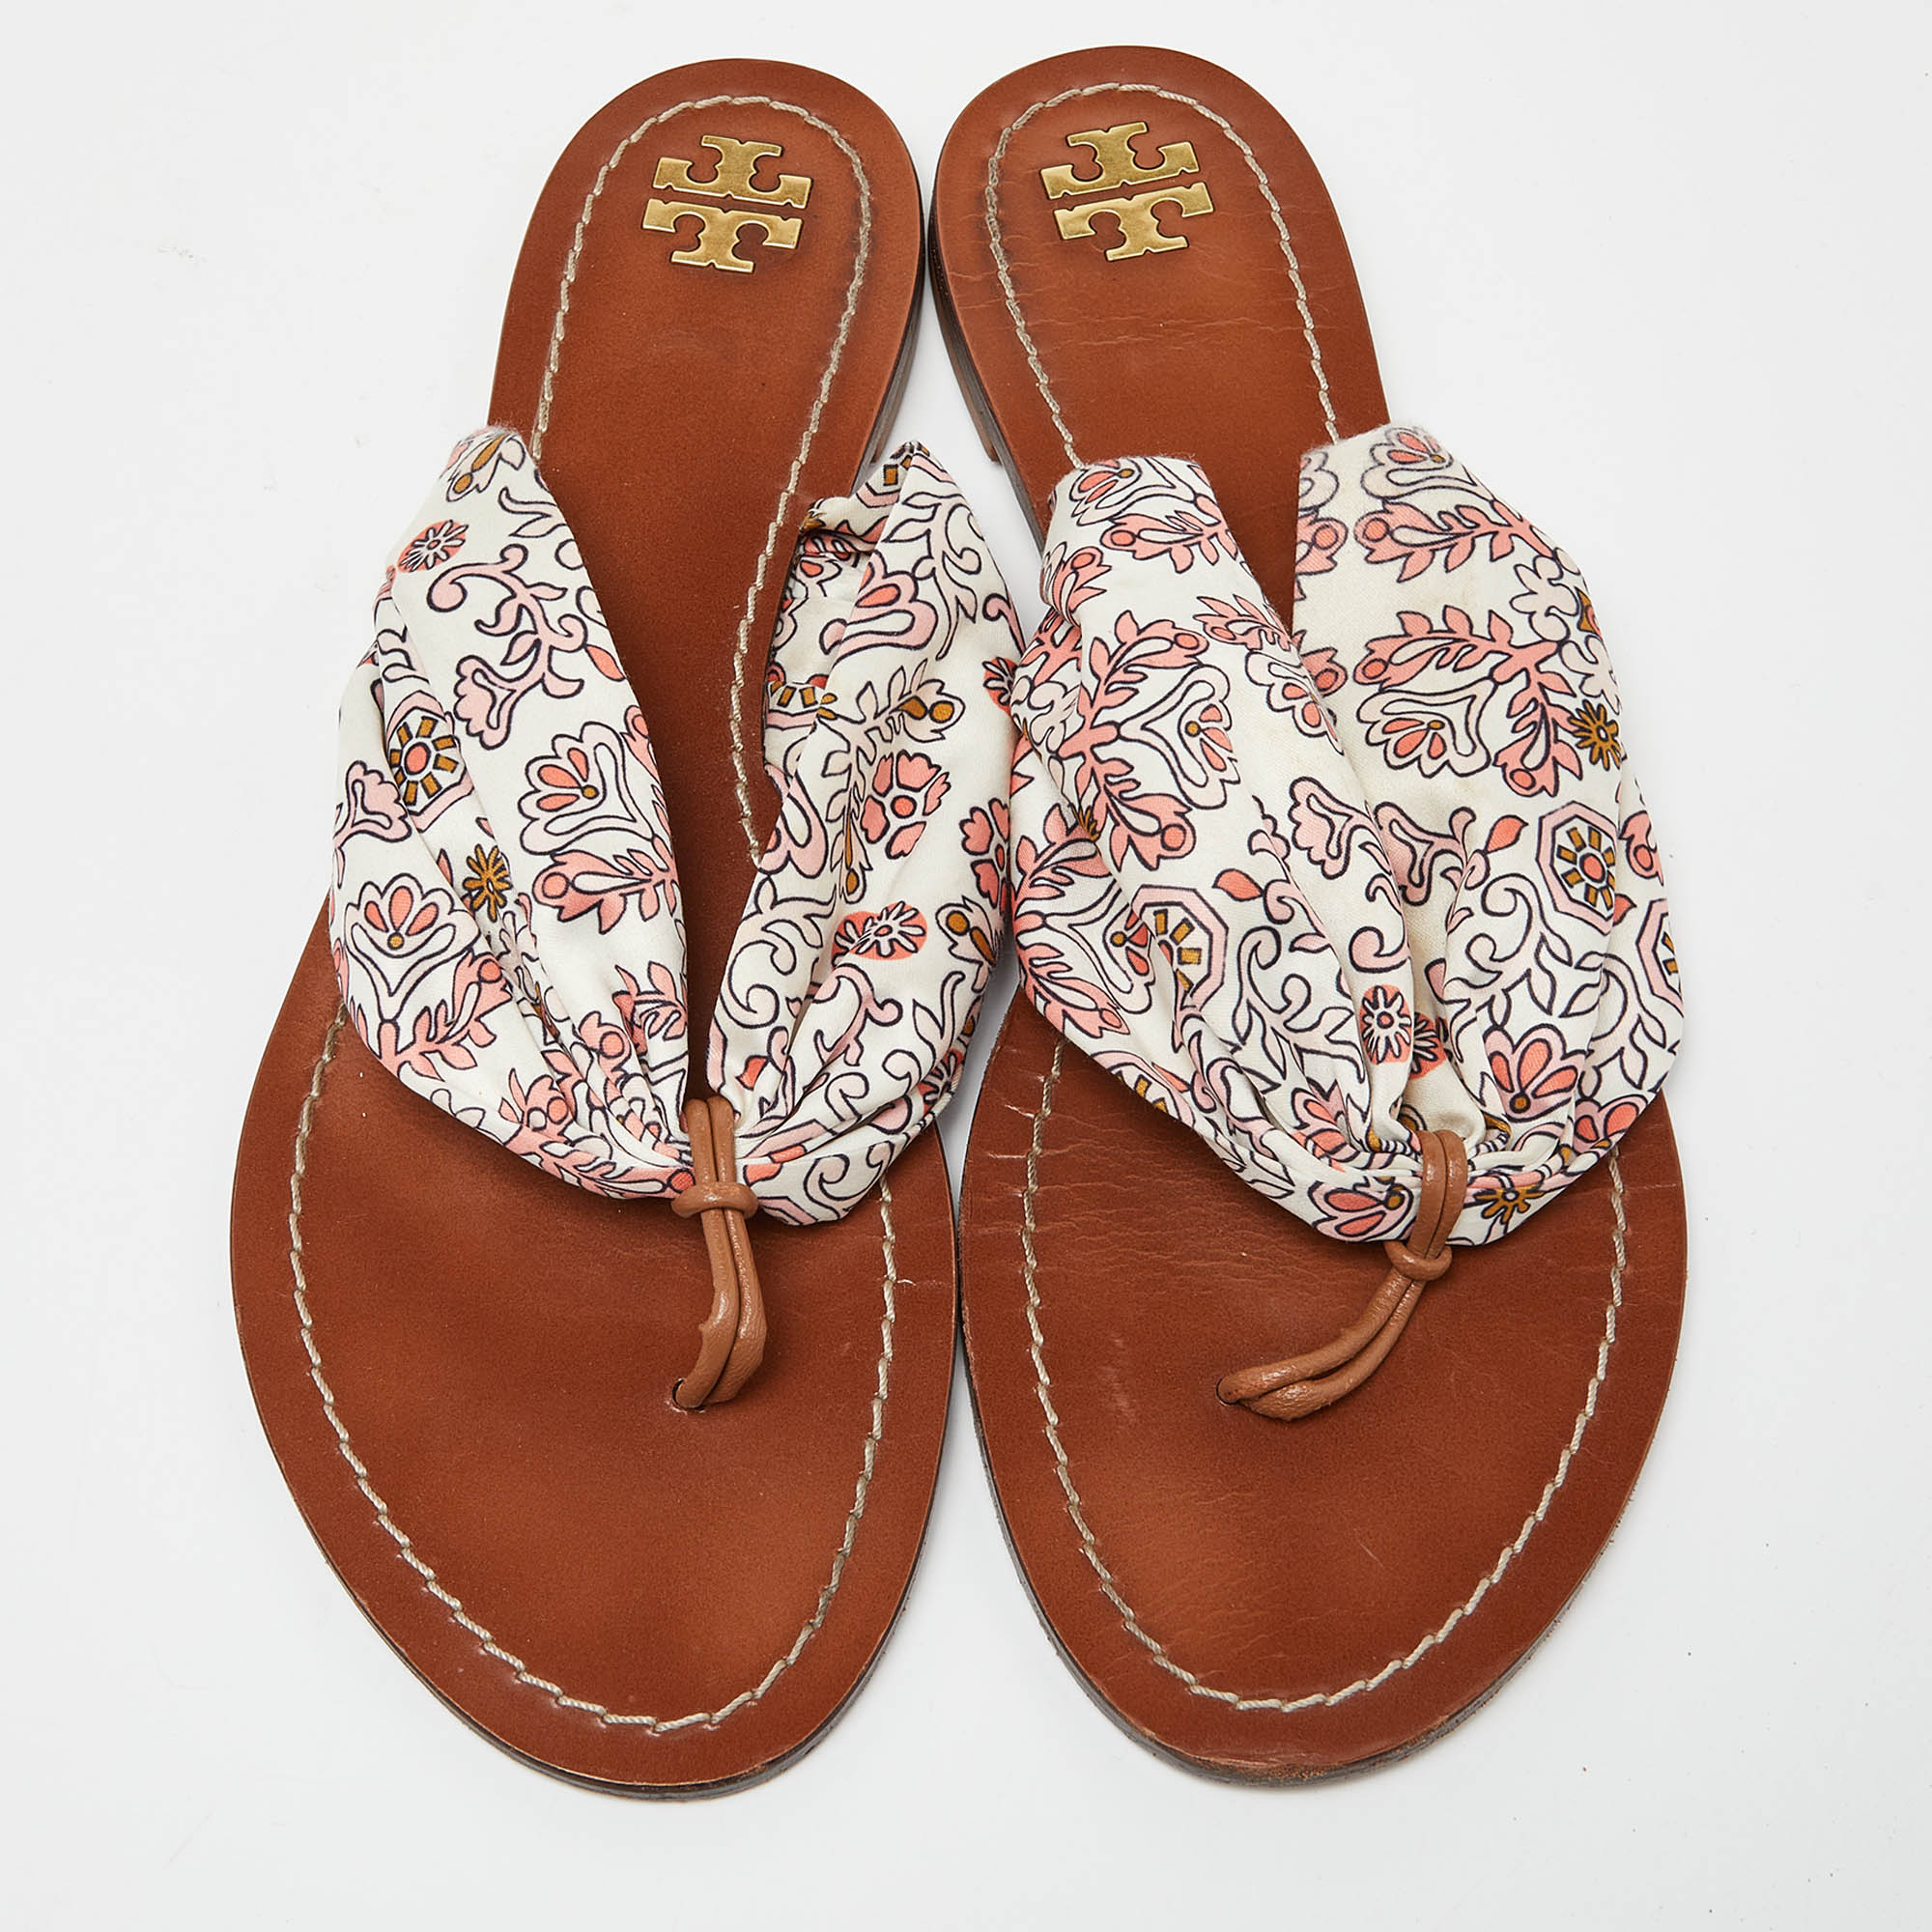 Tory Burch Multicolor Print Satin Carson Thong Sandals Size 41